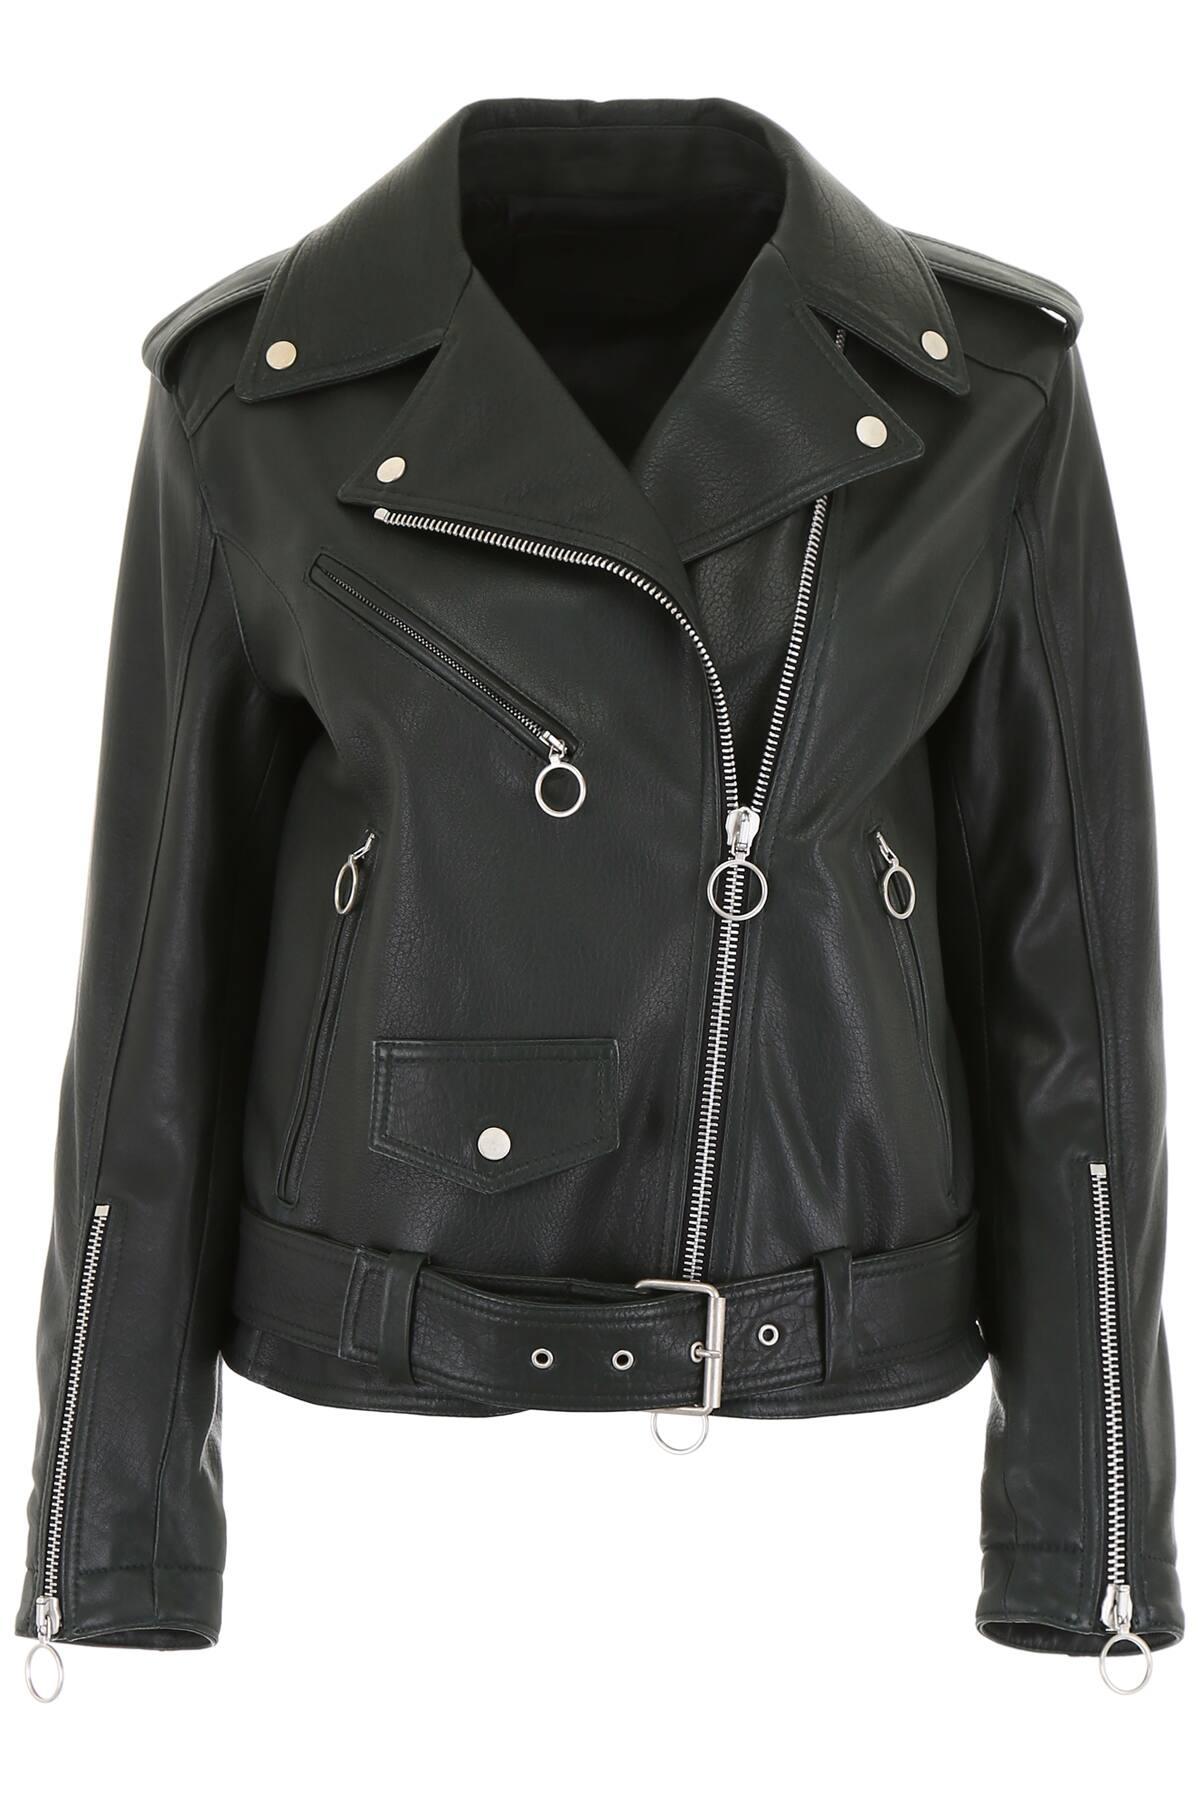 DROMe Leather Jacket in Green - Lyst